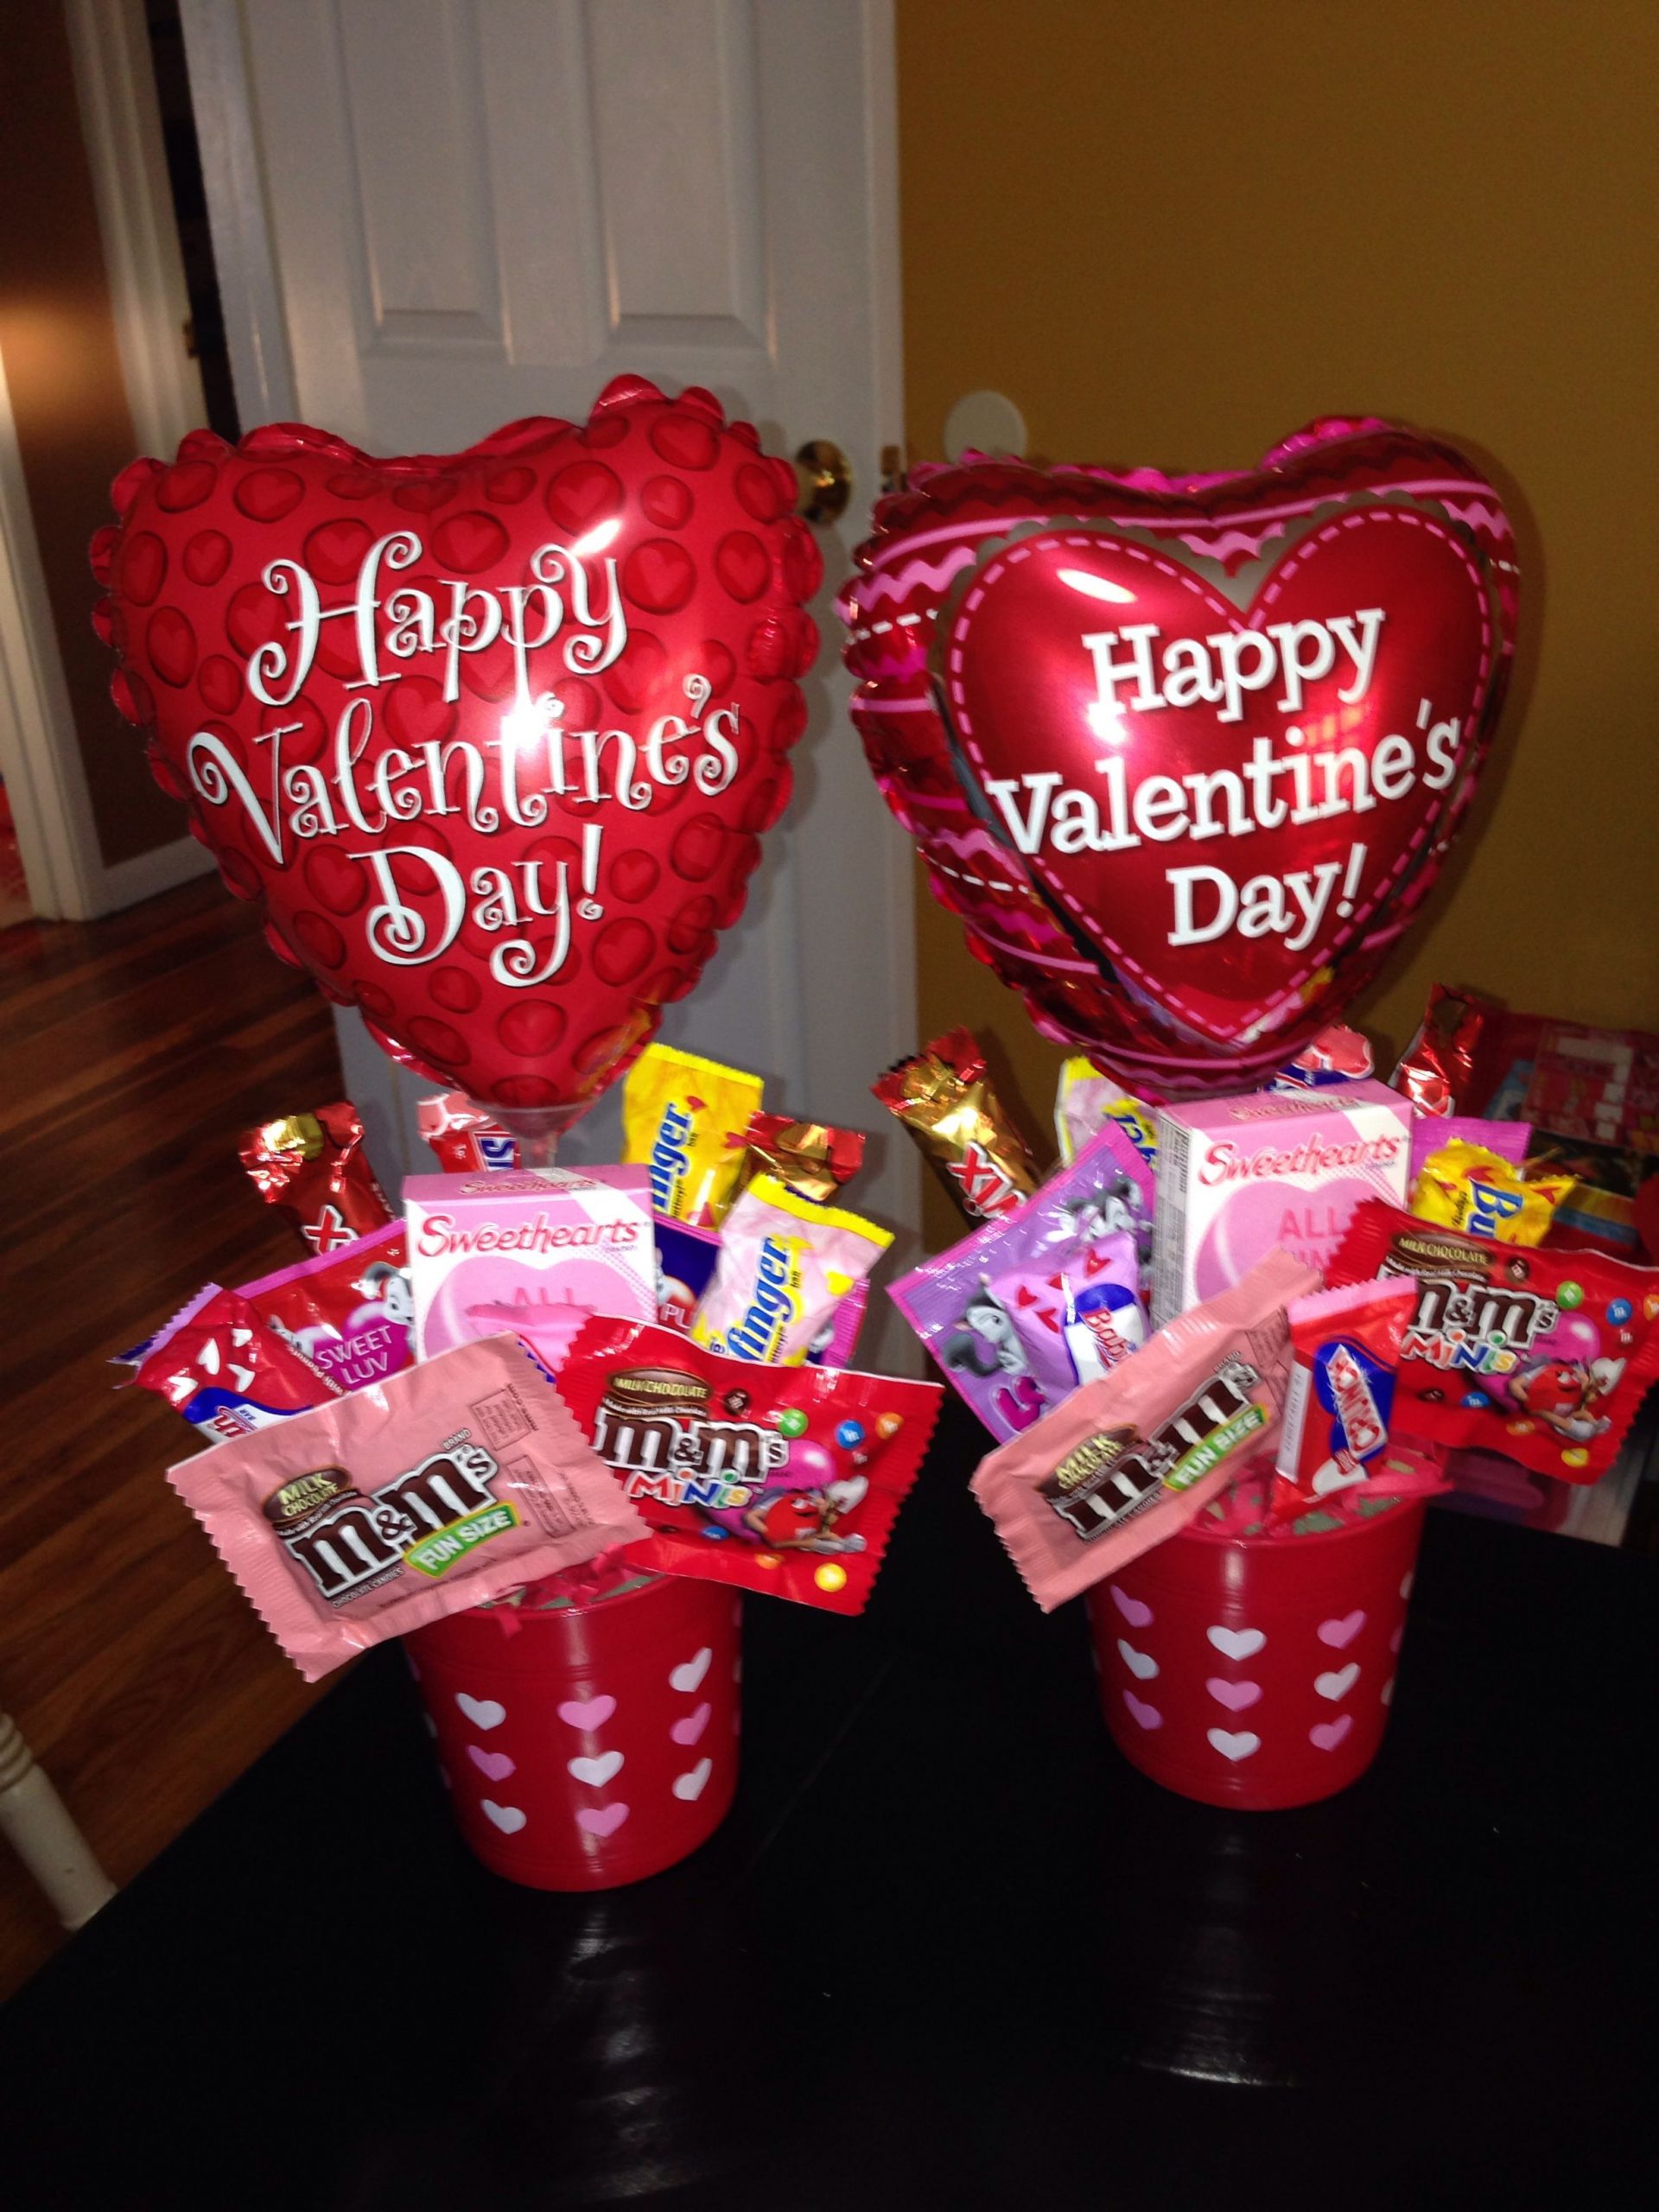 Valentine Candy Gift Ideas
 Small valentines bouquets Candy bouquets